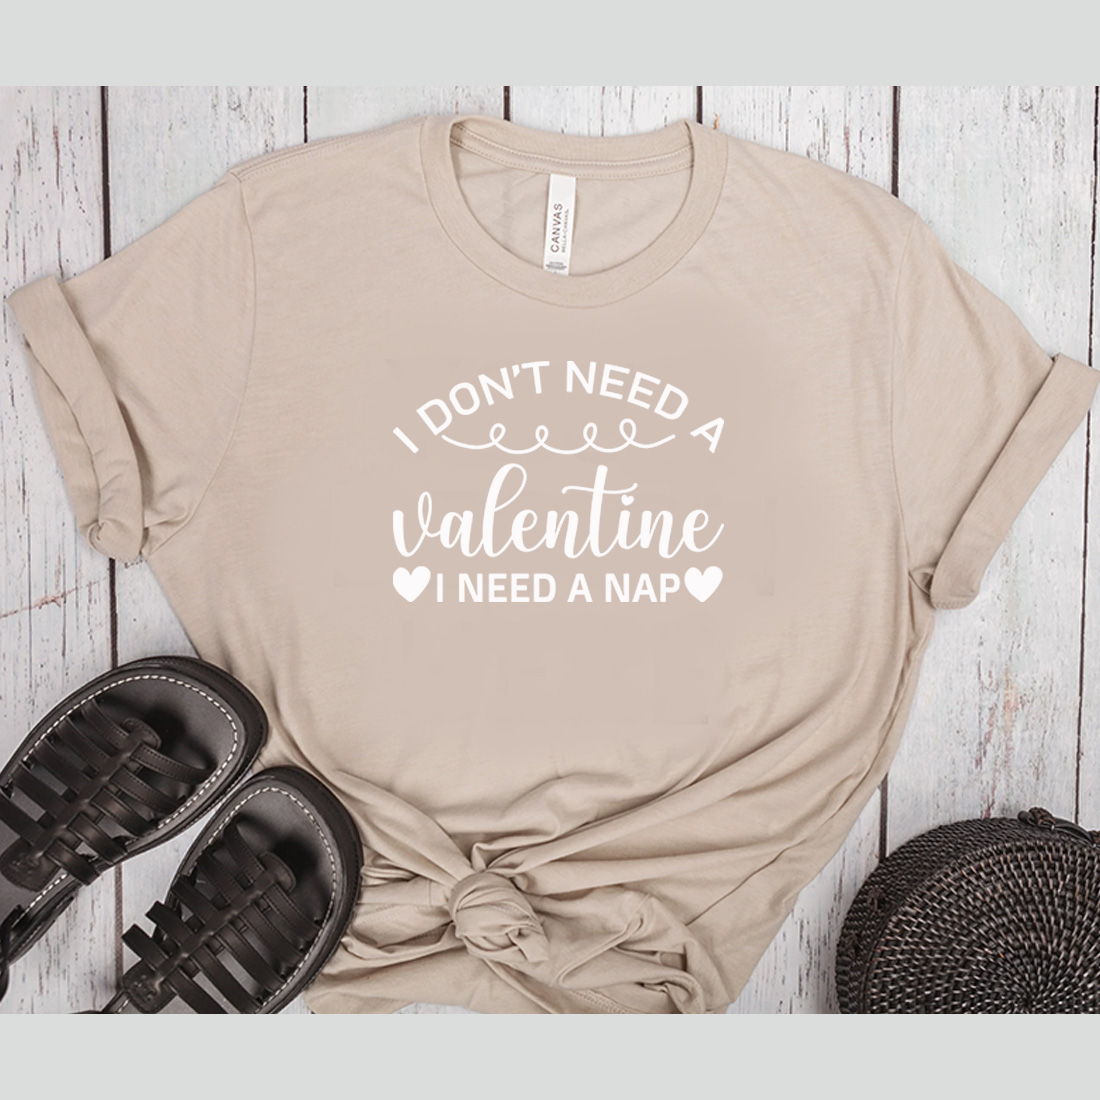 Image of a t-shirt with a charming slogan I Dont Need A Valentine I Need A Nap